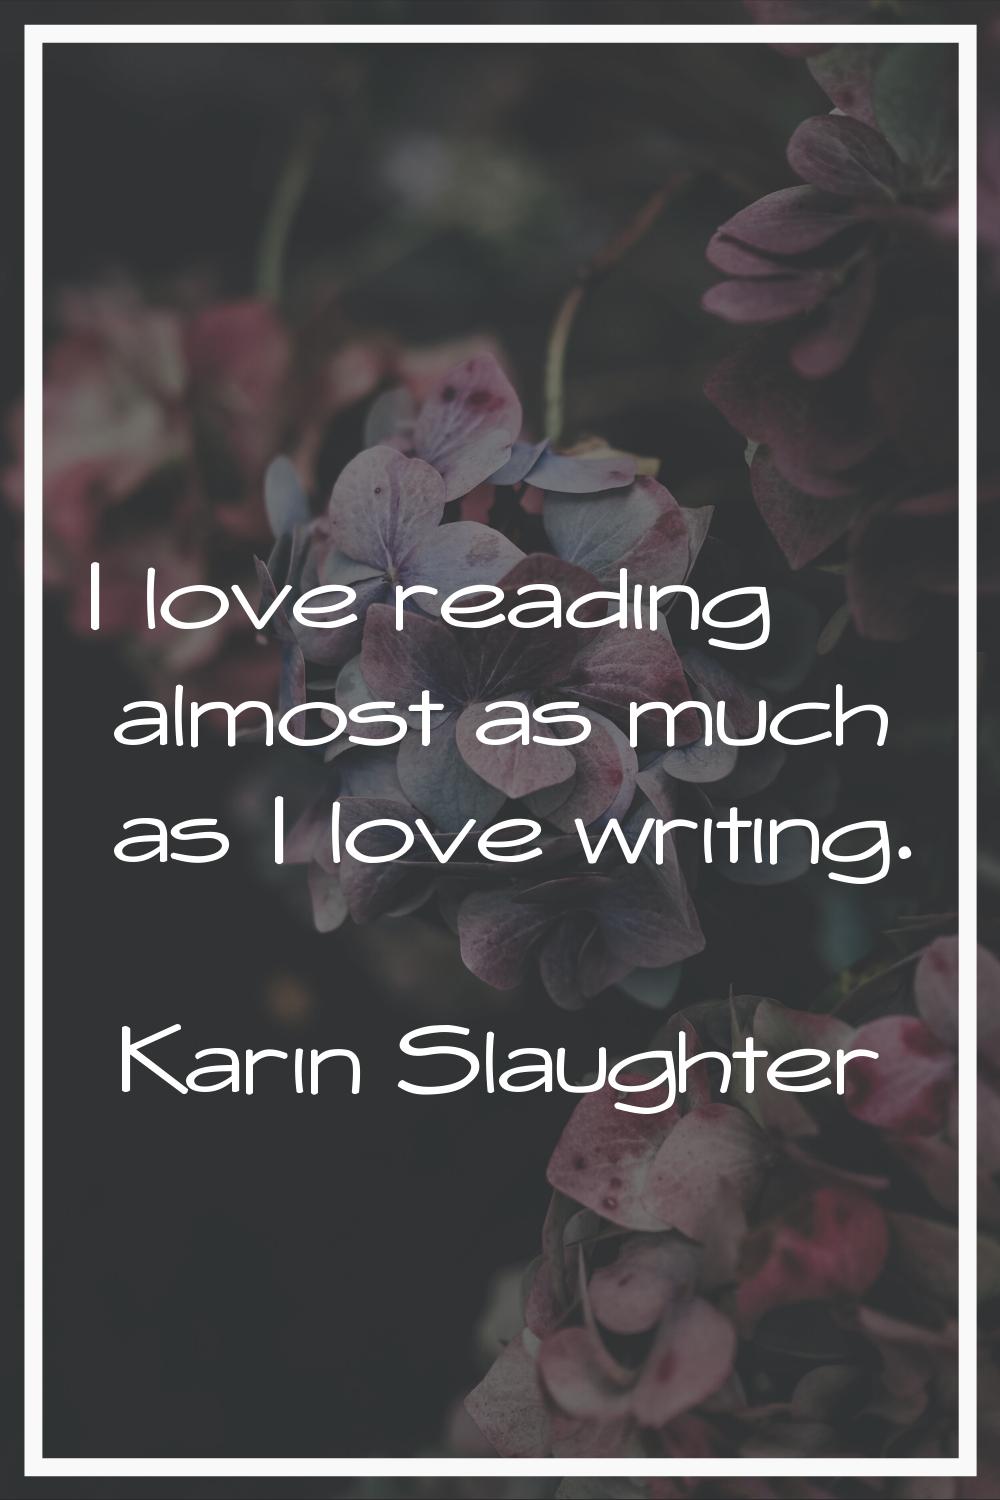 I love reading almost as much as I love writing.